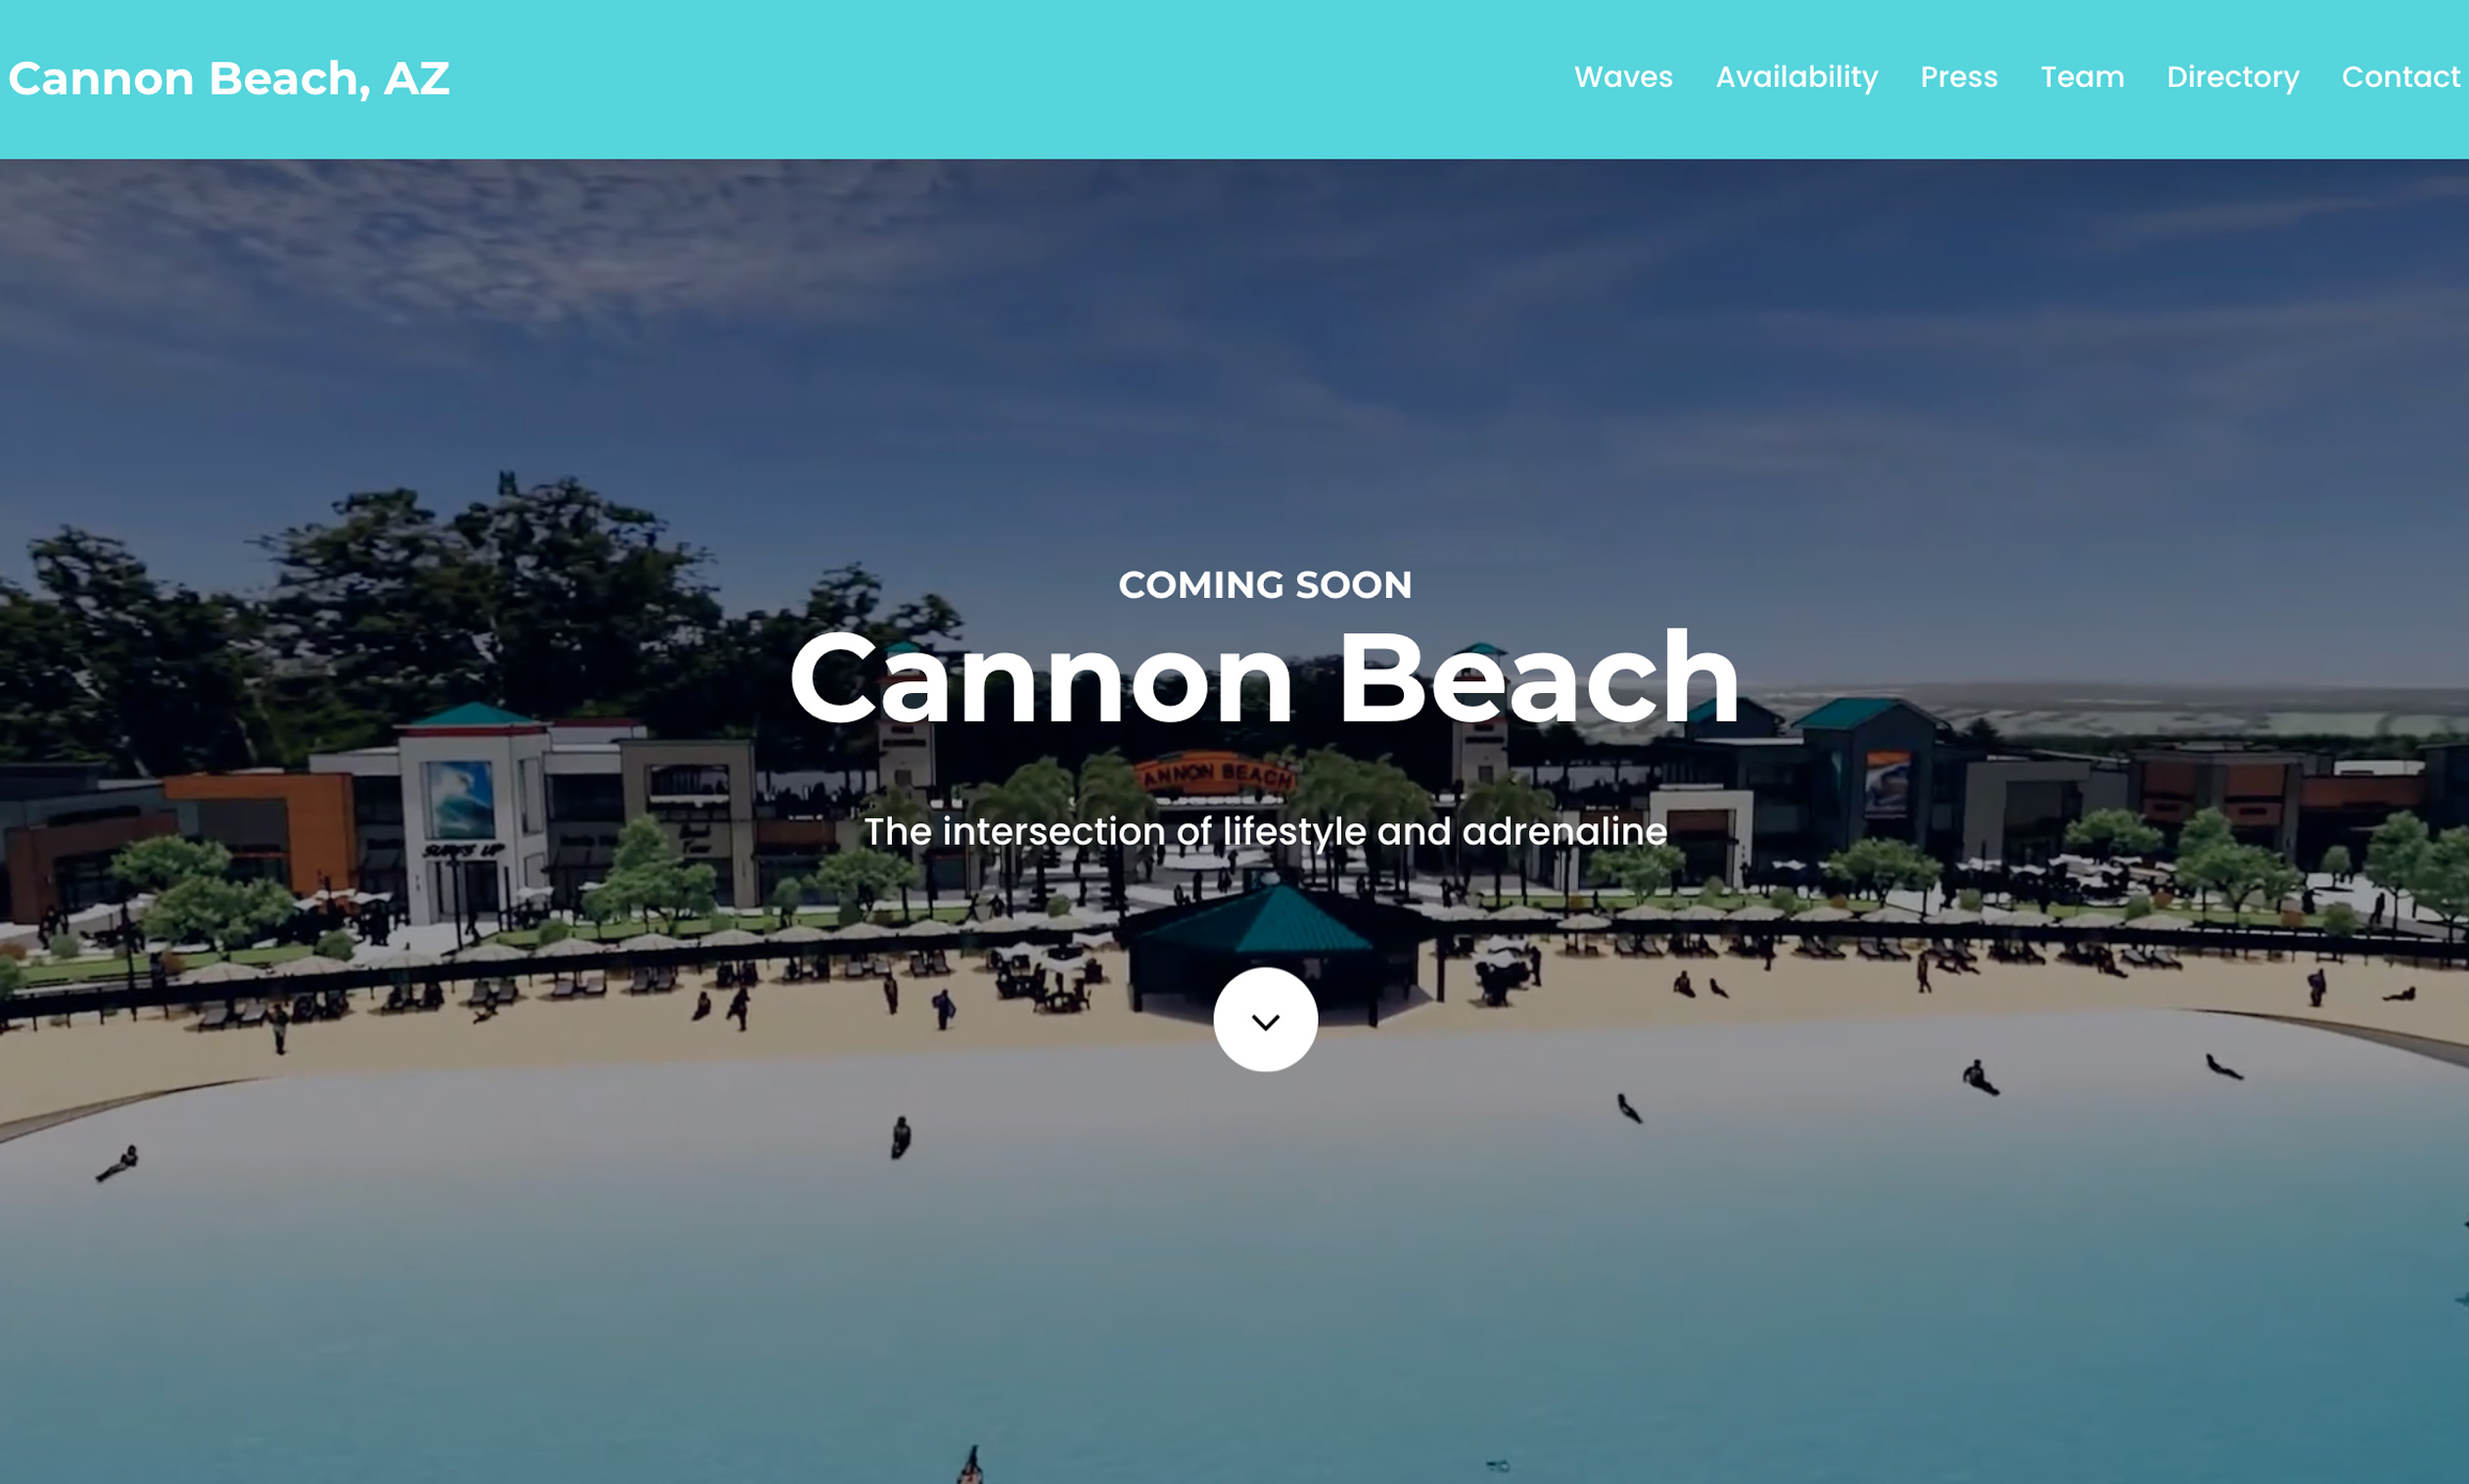 Cannon Beach AZ landing page designed and built by waves and water